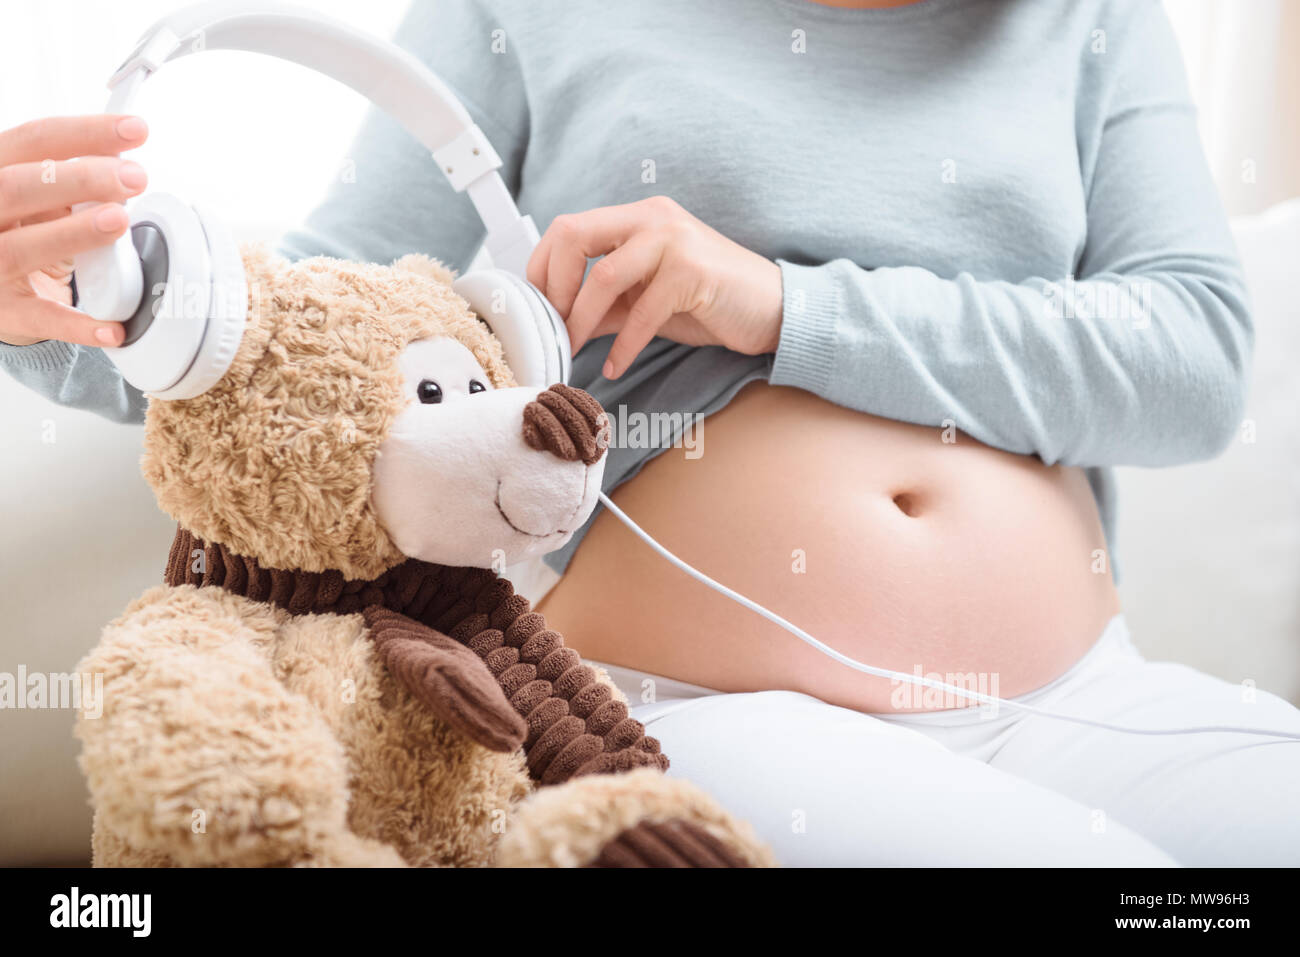 charming redhead pregnant woman with headphones on her belly sitting on  sofa with teddy bear, Stock image